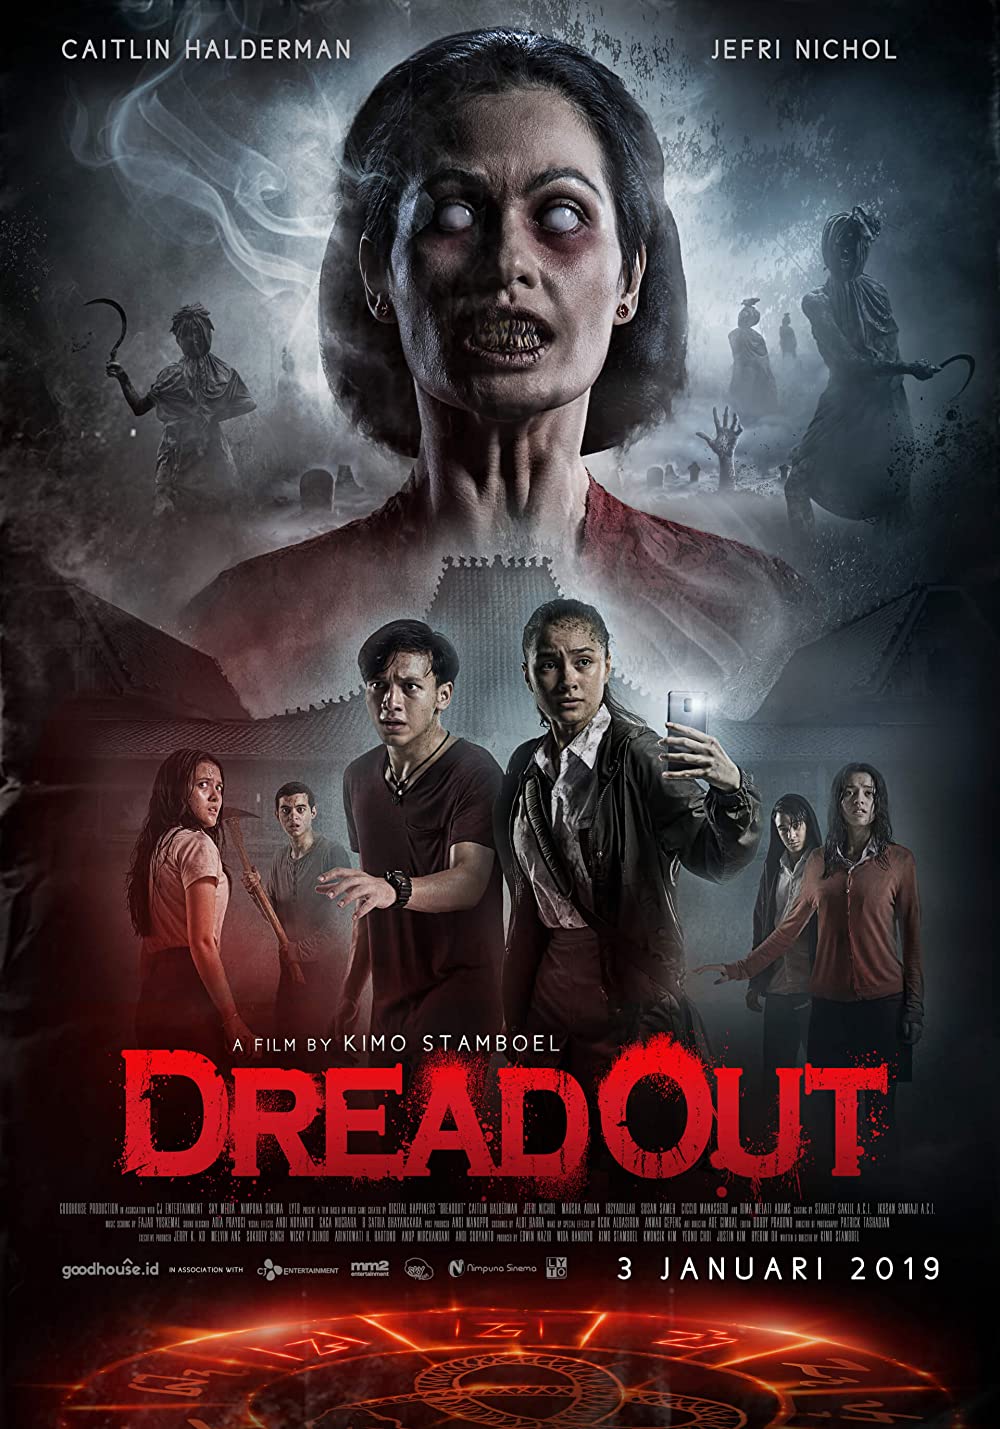 dreadout tower of hell (2019)